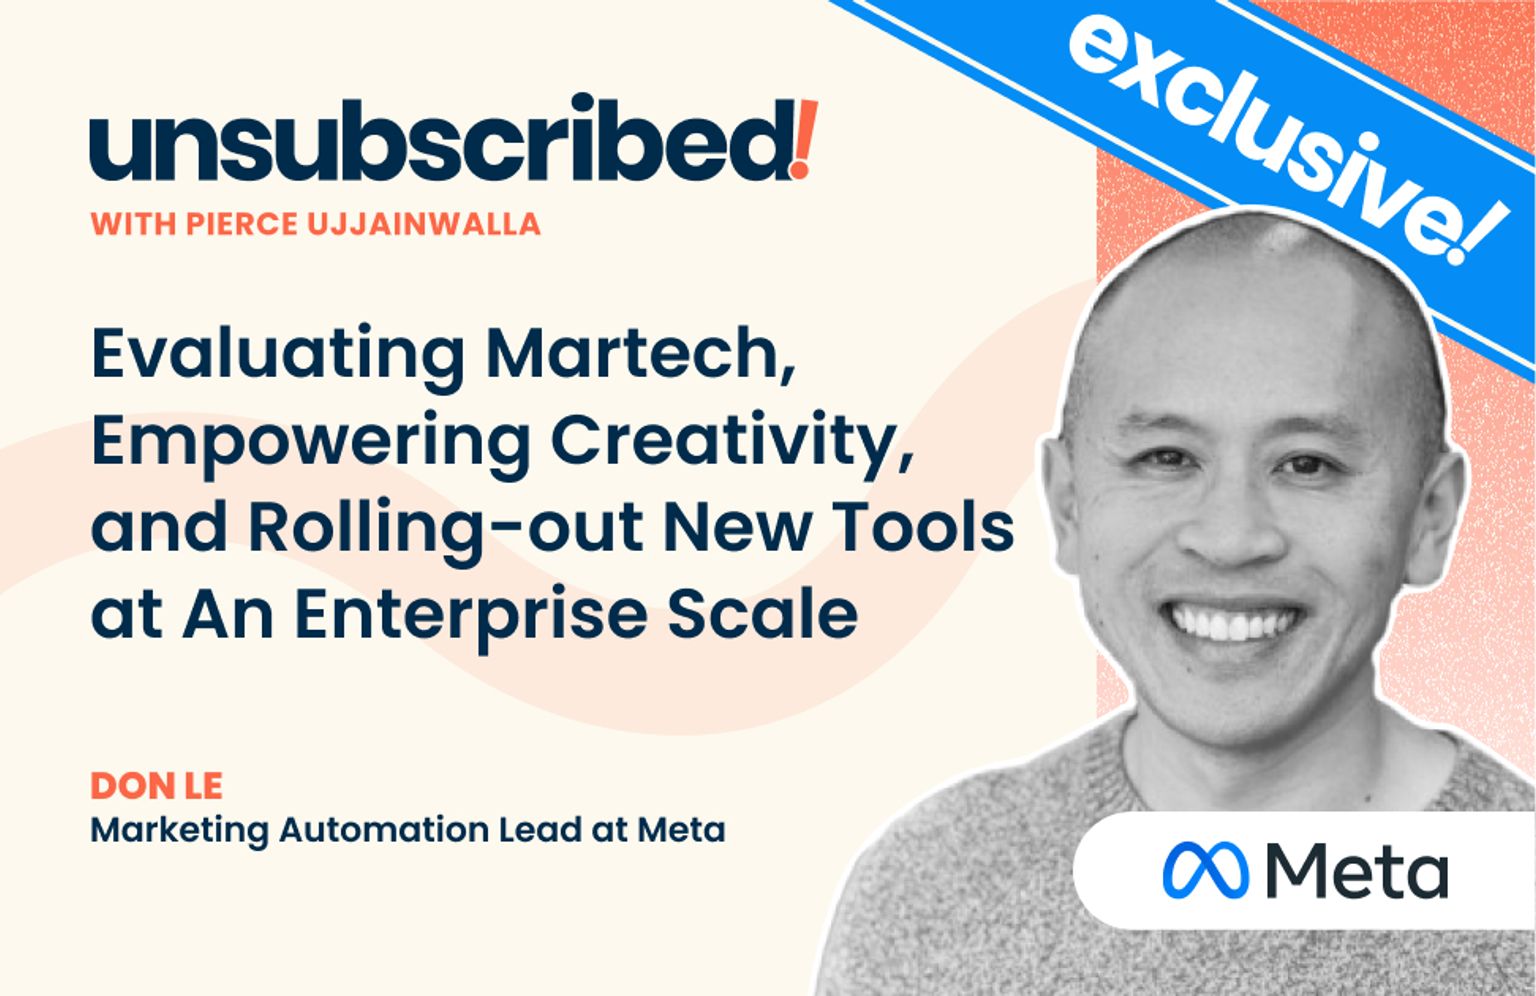 Evaluating Martech, Empowering Creativity, and Rolling-out New Tools at An Enterprise Scale